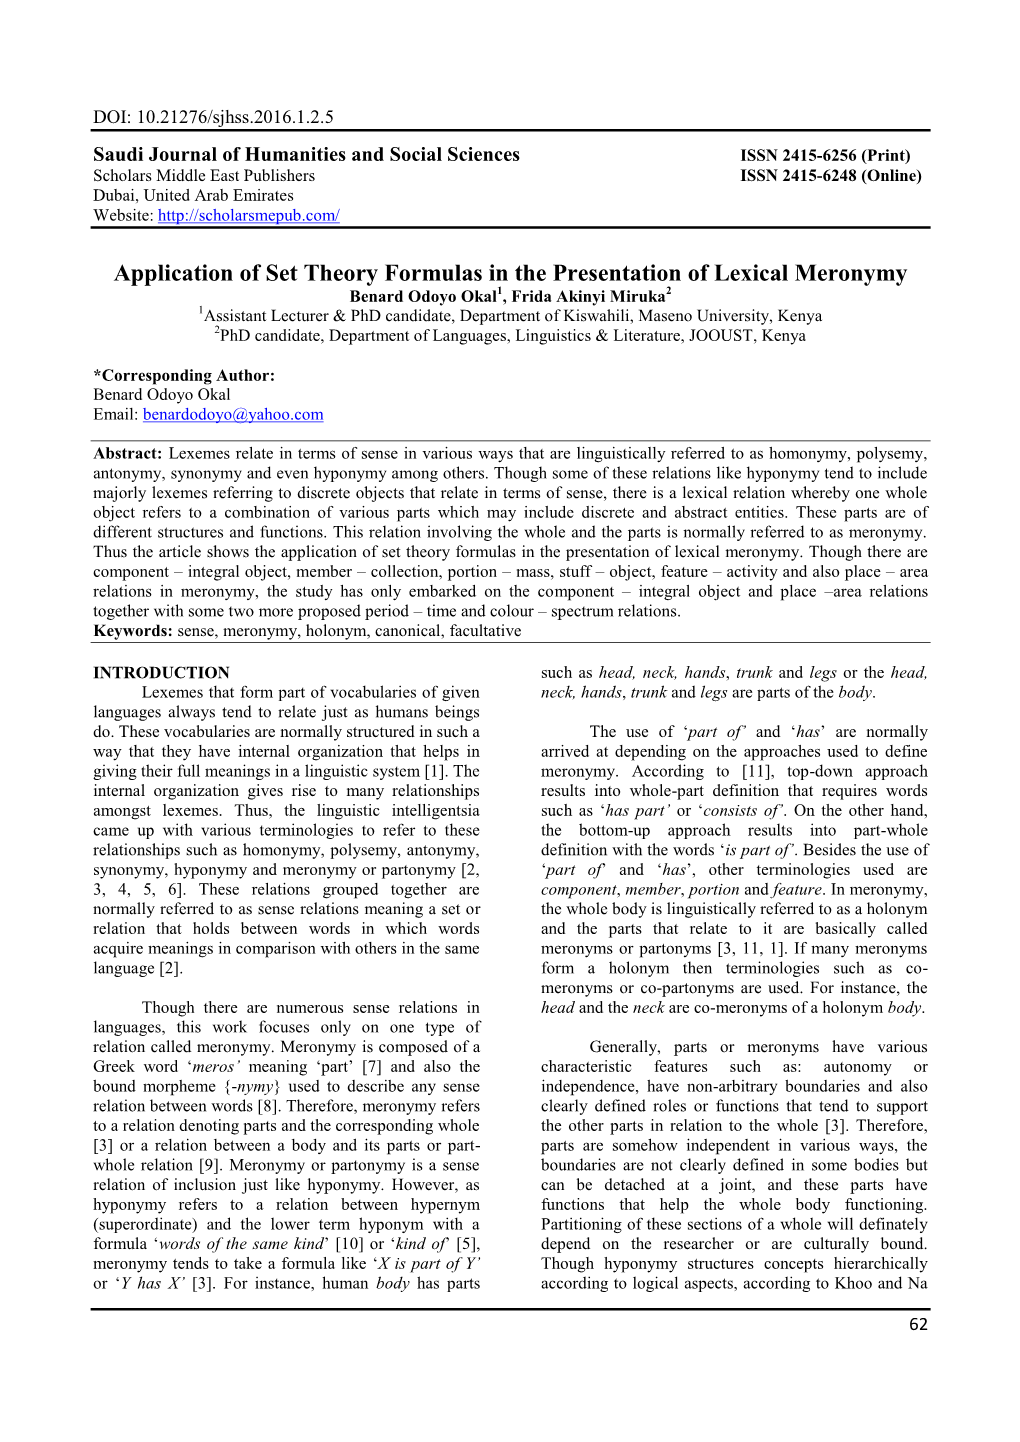 Application of Set Theory Formulas in the Presentation of Lexical Meronymy